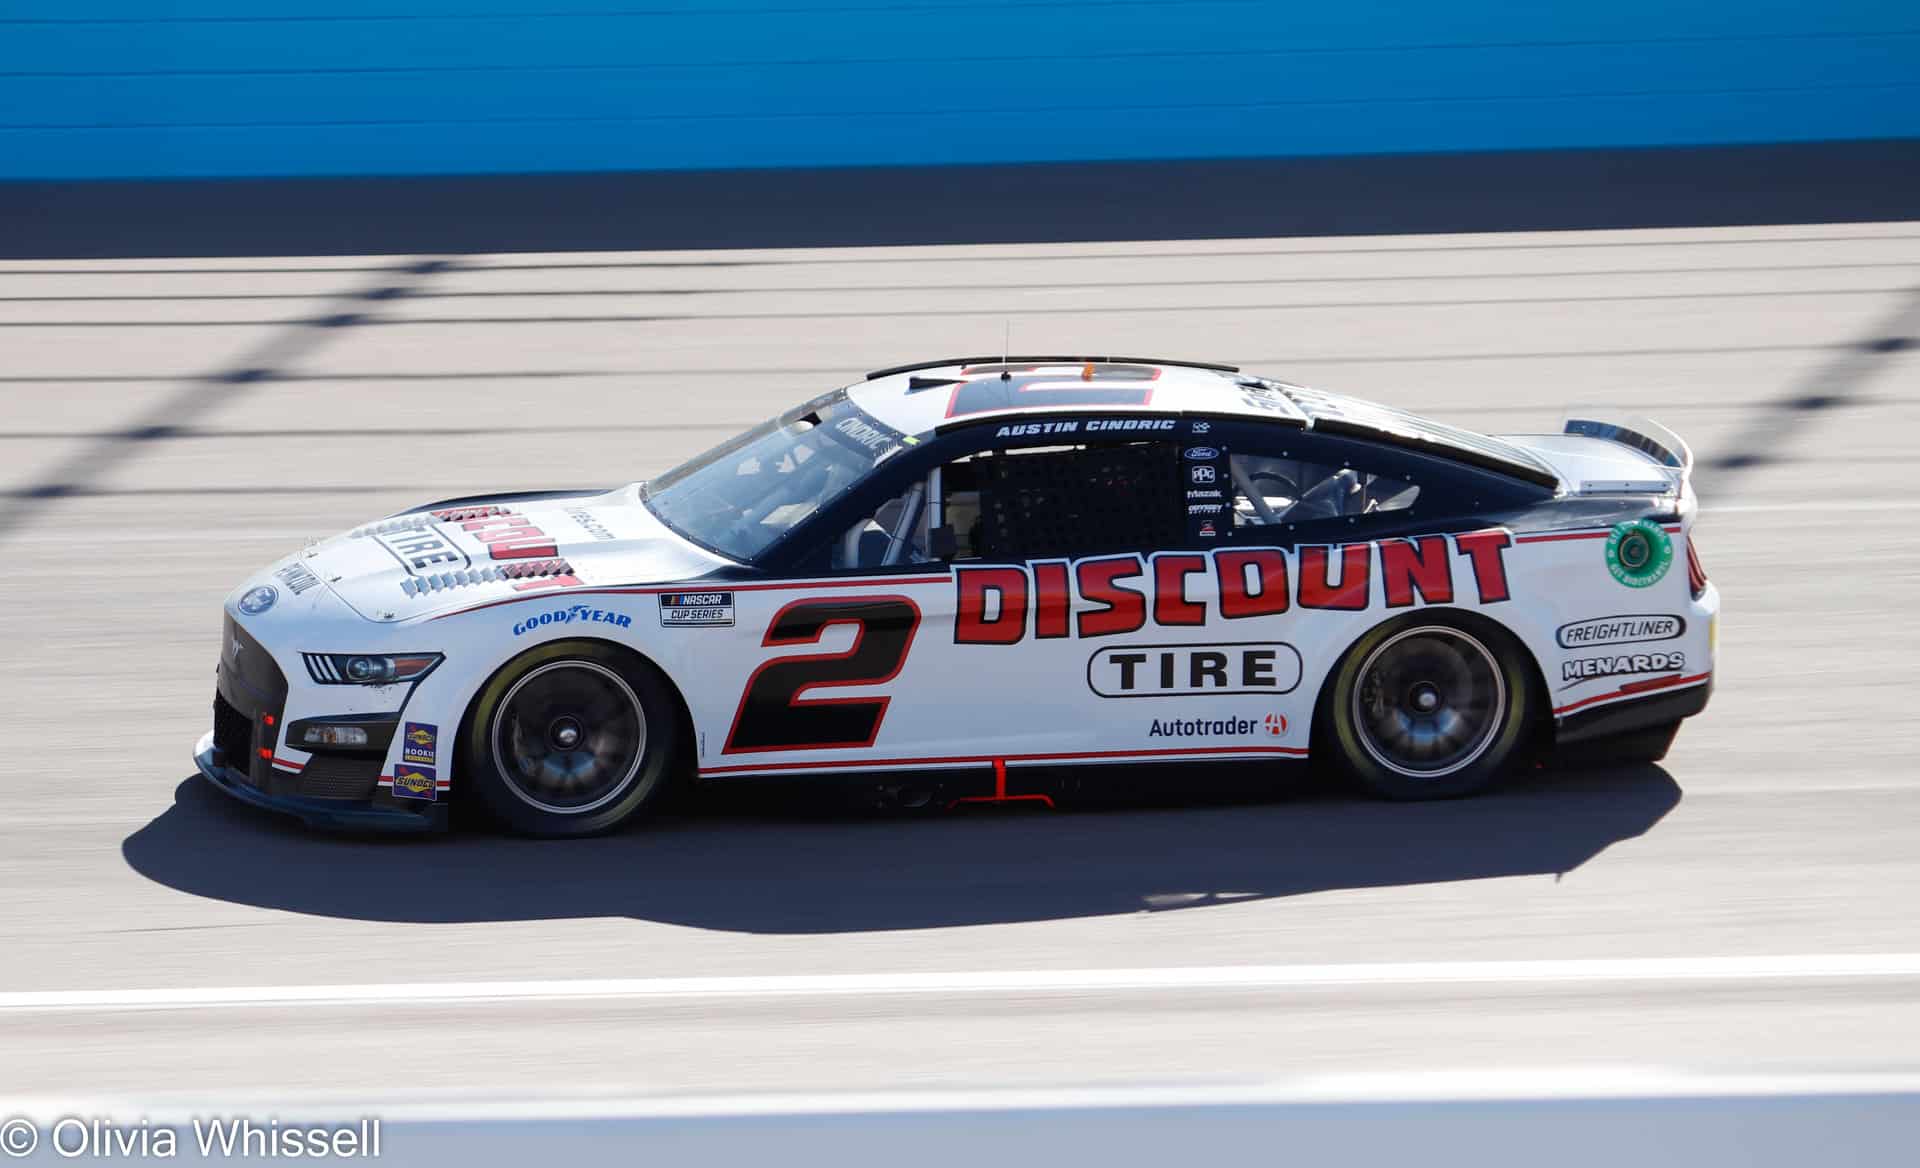 Photo of cindric in the no. 2 penske ford at phoenix raceway